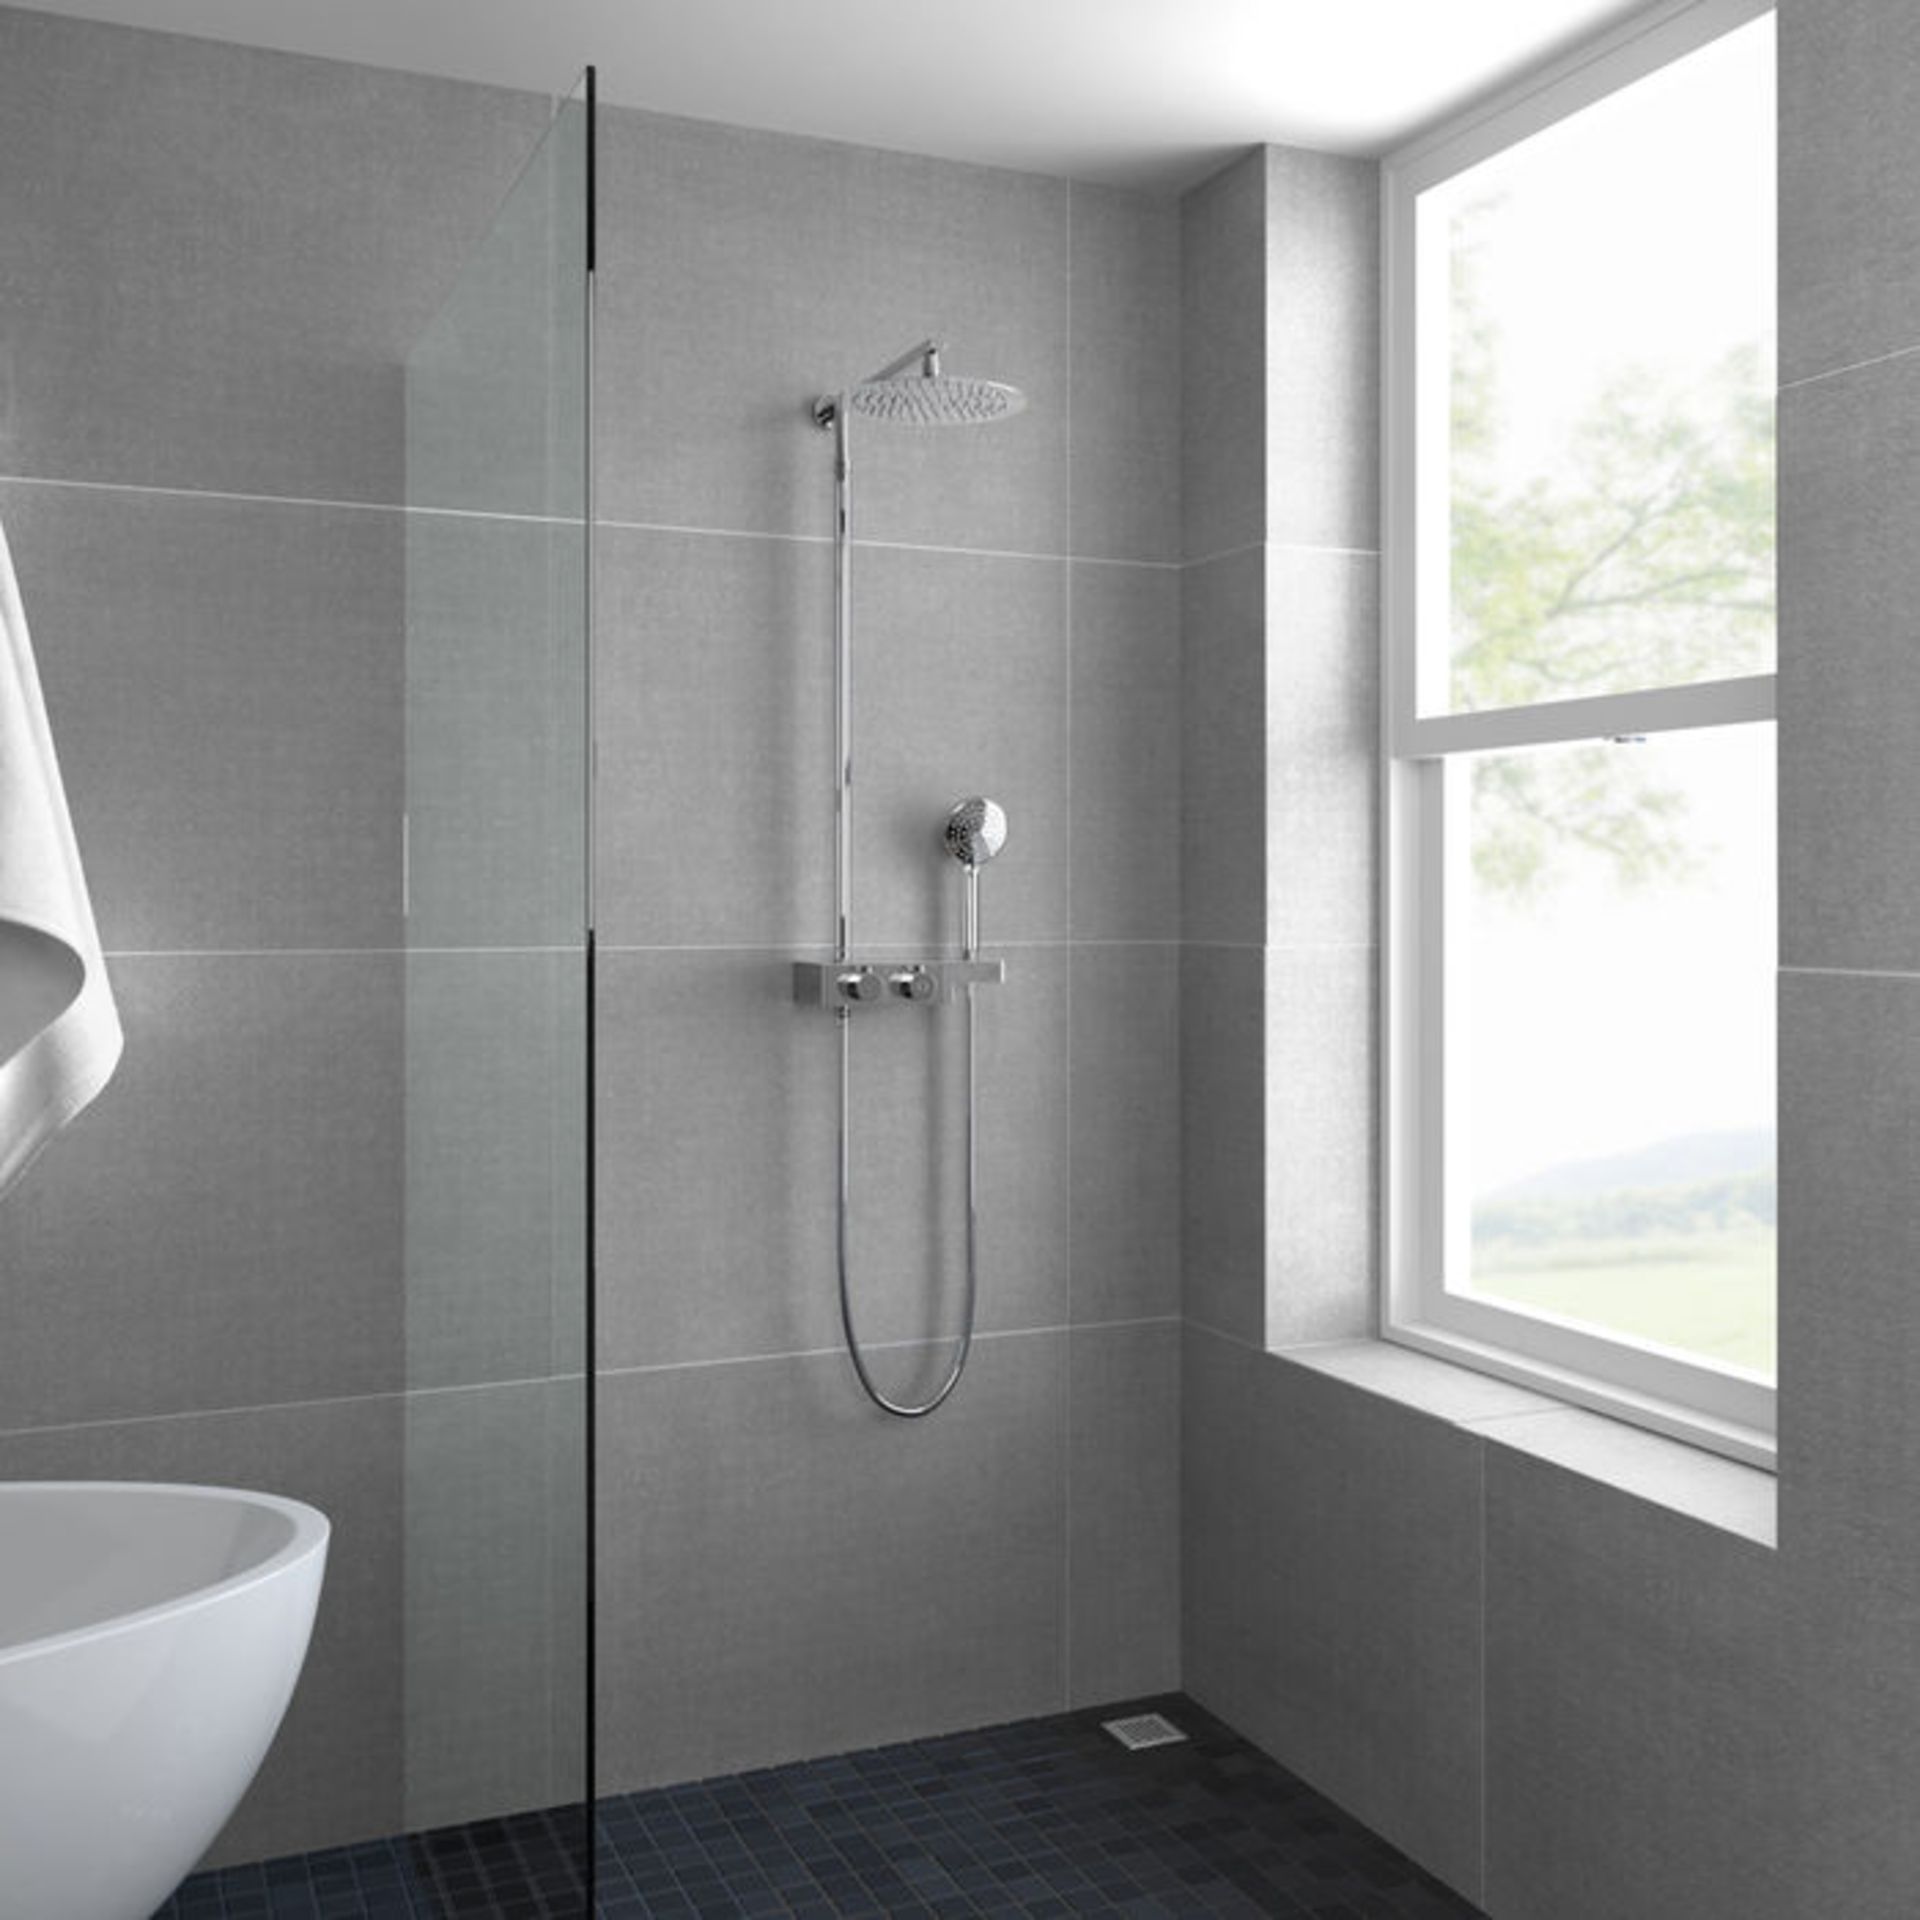 (UK264) Round Exposed Thermostatic Mixer Shower Kit & Large Head. Cool to touch shower for - Image 4 of 4